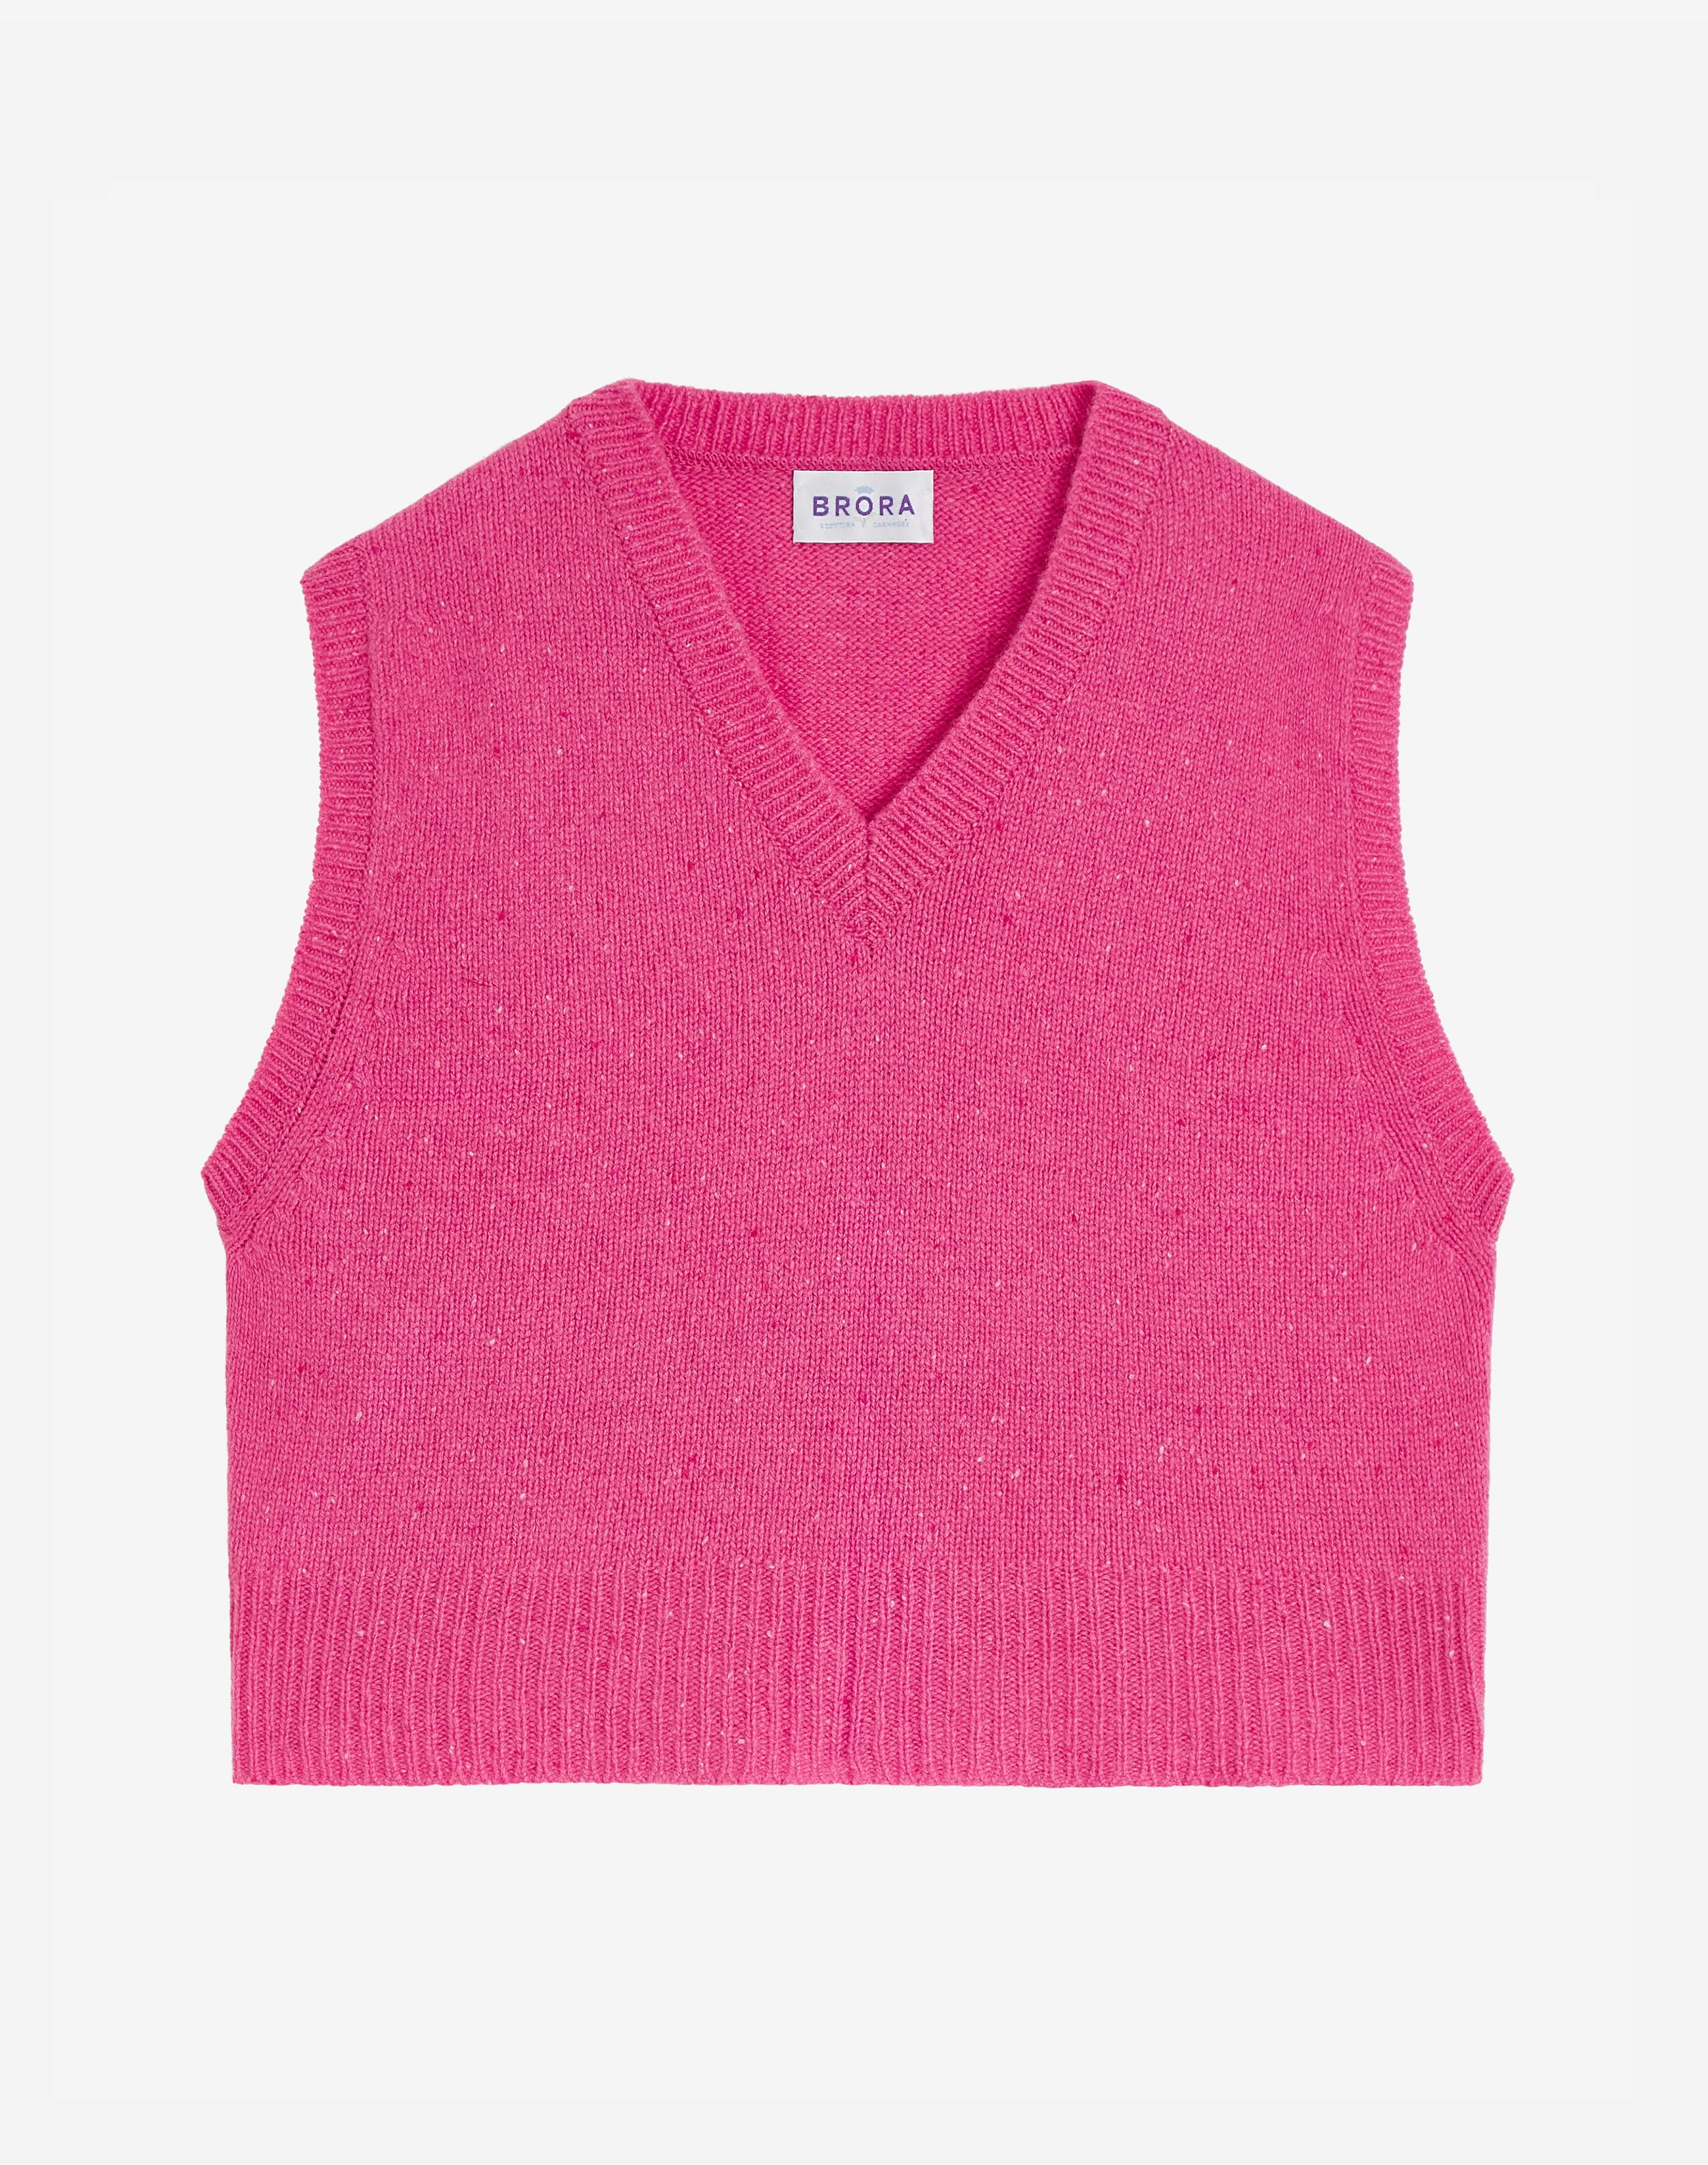 Cashmere Donegal V Neck Tank in Peony | Knitwear | Brora